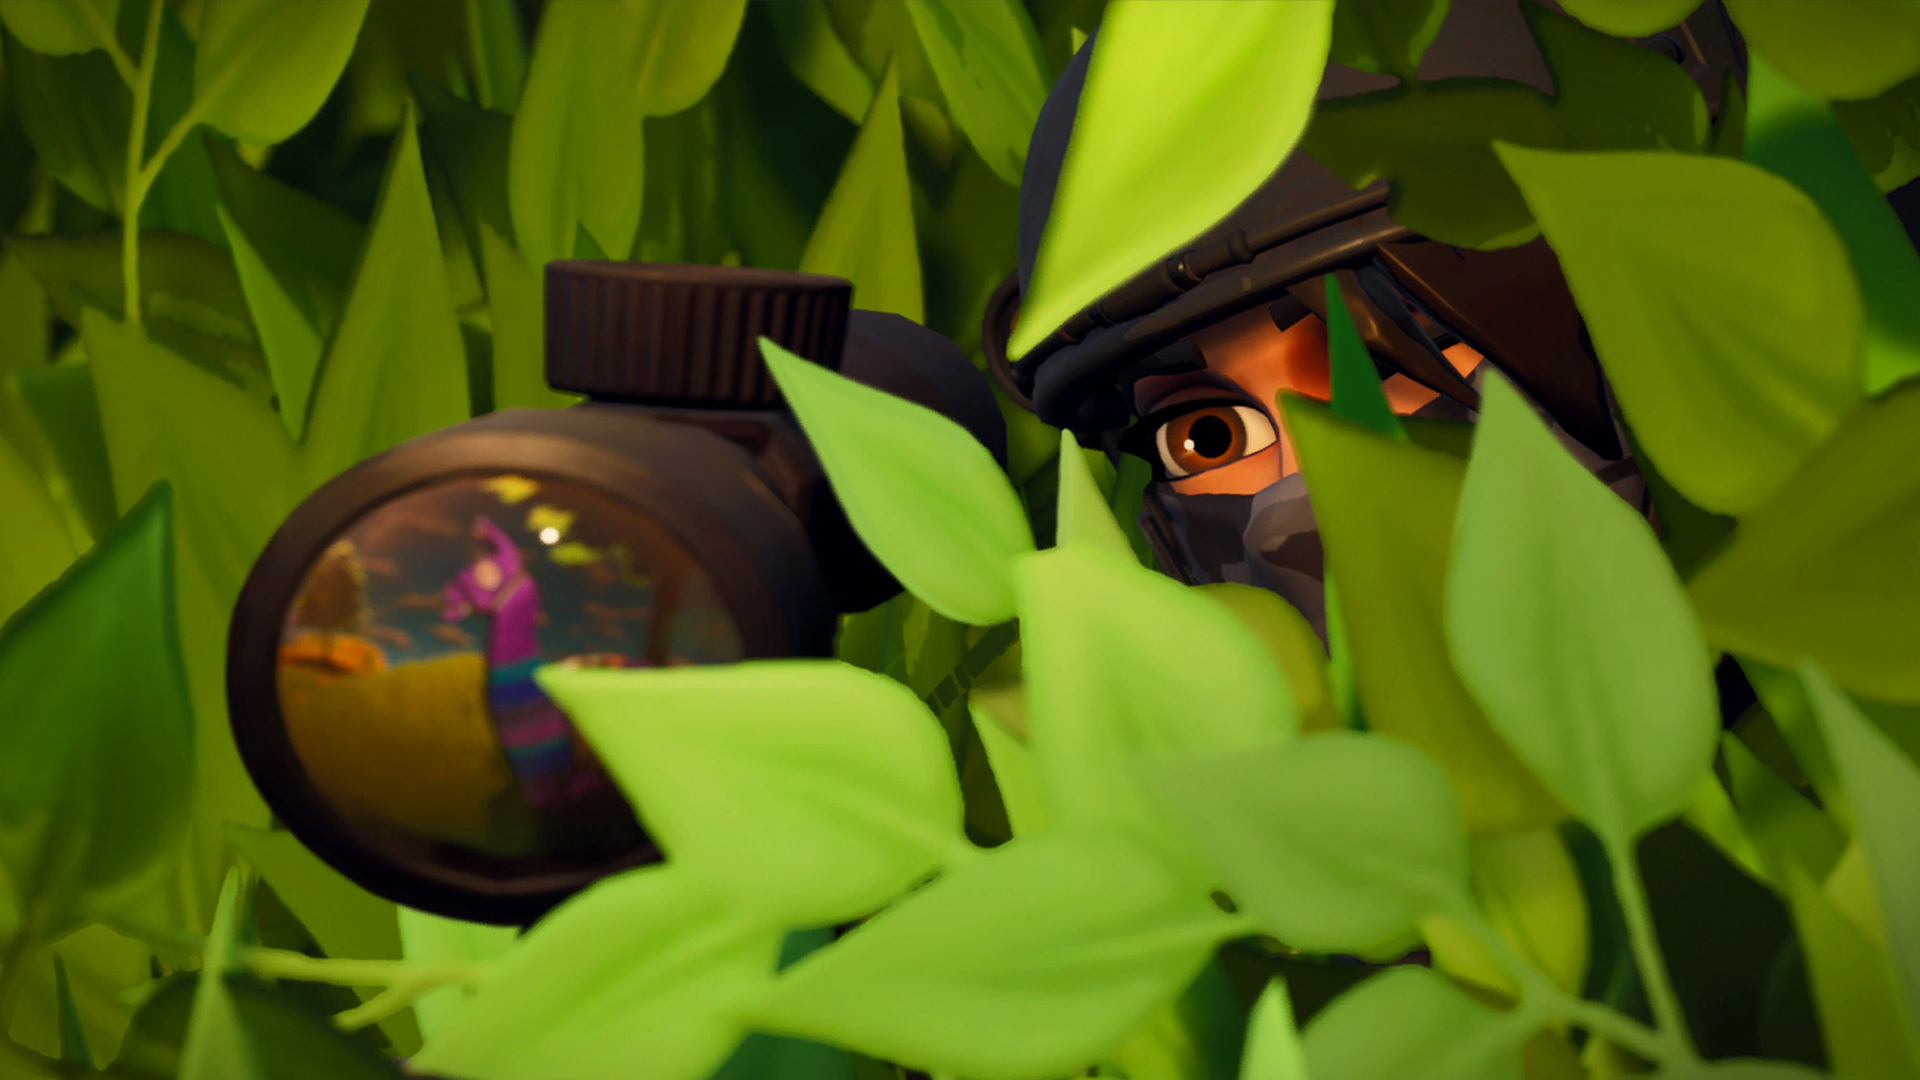 Top 15 Best Fortnite Wallpapers That Need to be Your New ... - 1920 x 1080 jpeg 786kB